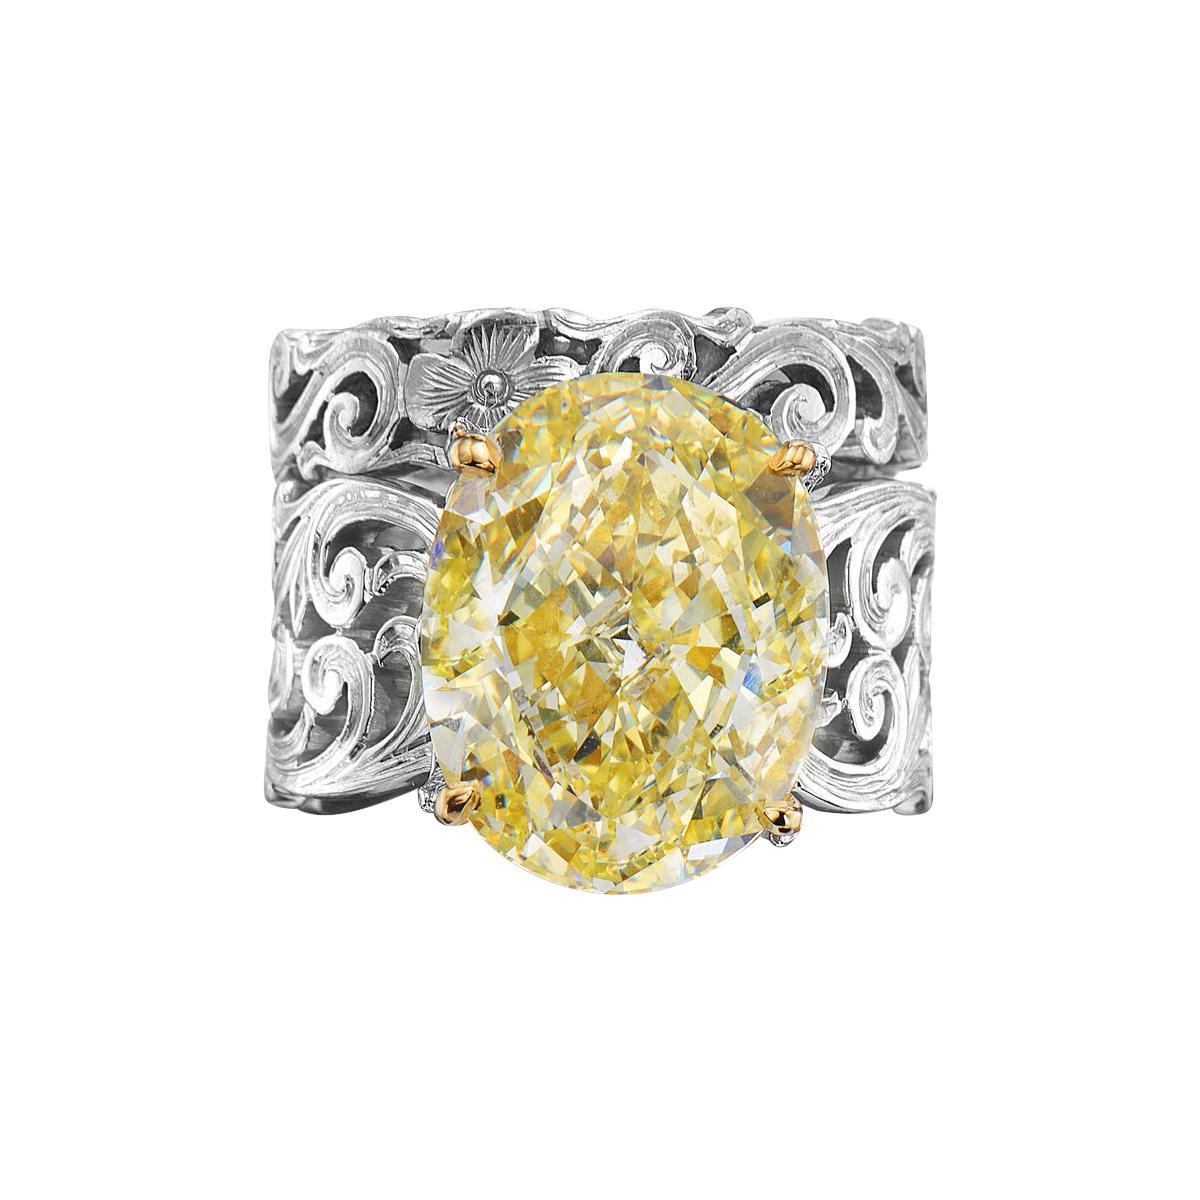 13.11 Carat Oval Fancy Yellow GIA Certified Diamond Engagement Ring and Band